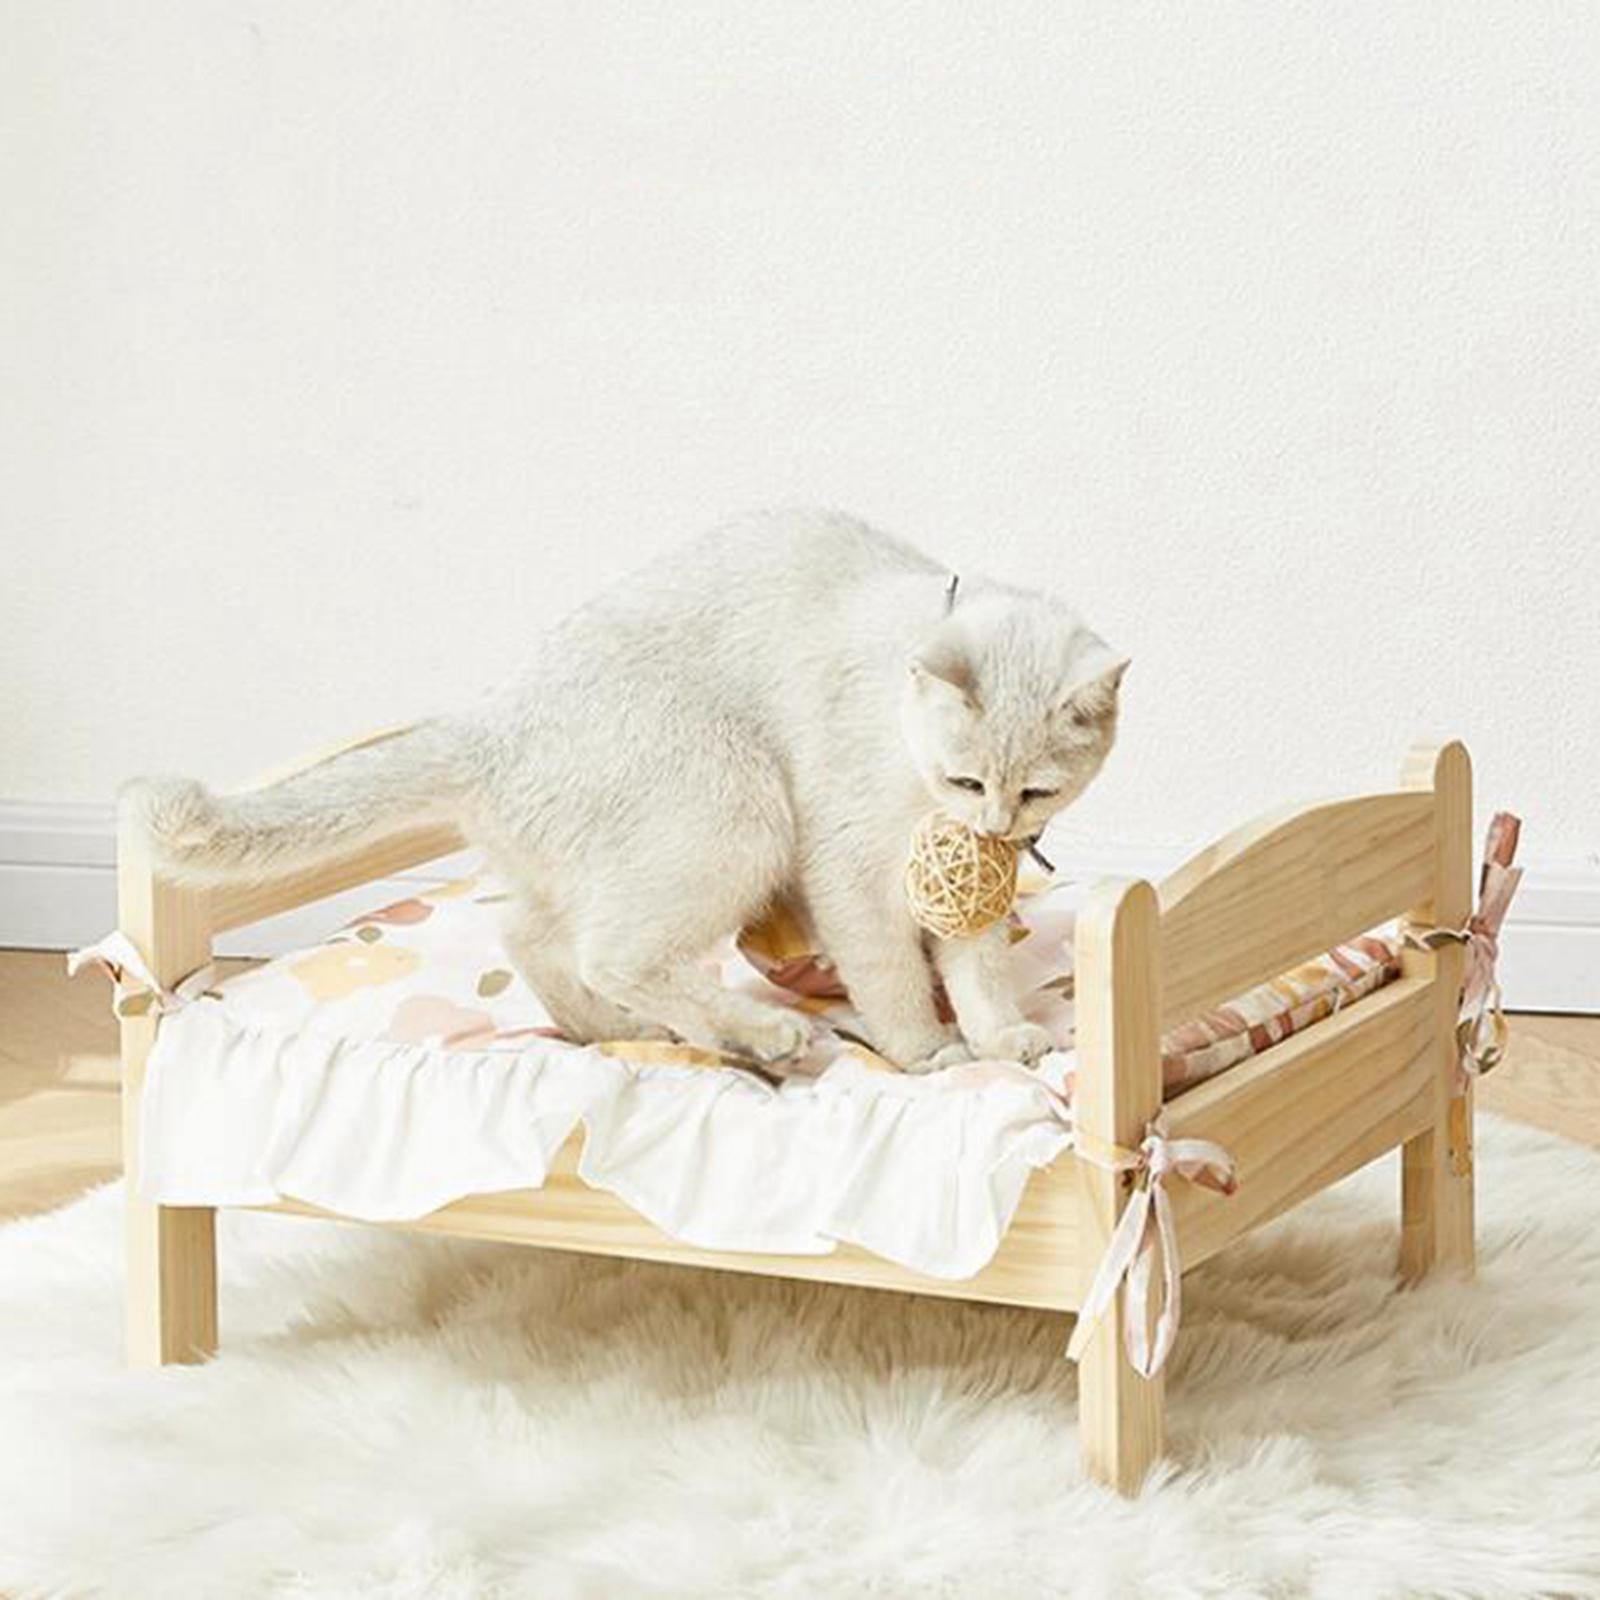 Pet Cat Bed， Small Dog Bed Puppy Kennel Kitten House Wood Winter Elevated Pet Bed Cat Furniture for Indoors and Outdoors Pets Supplies